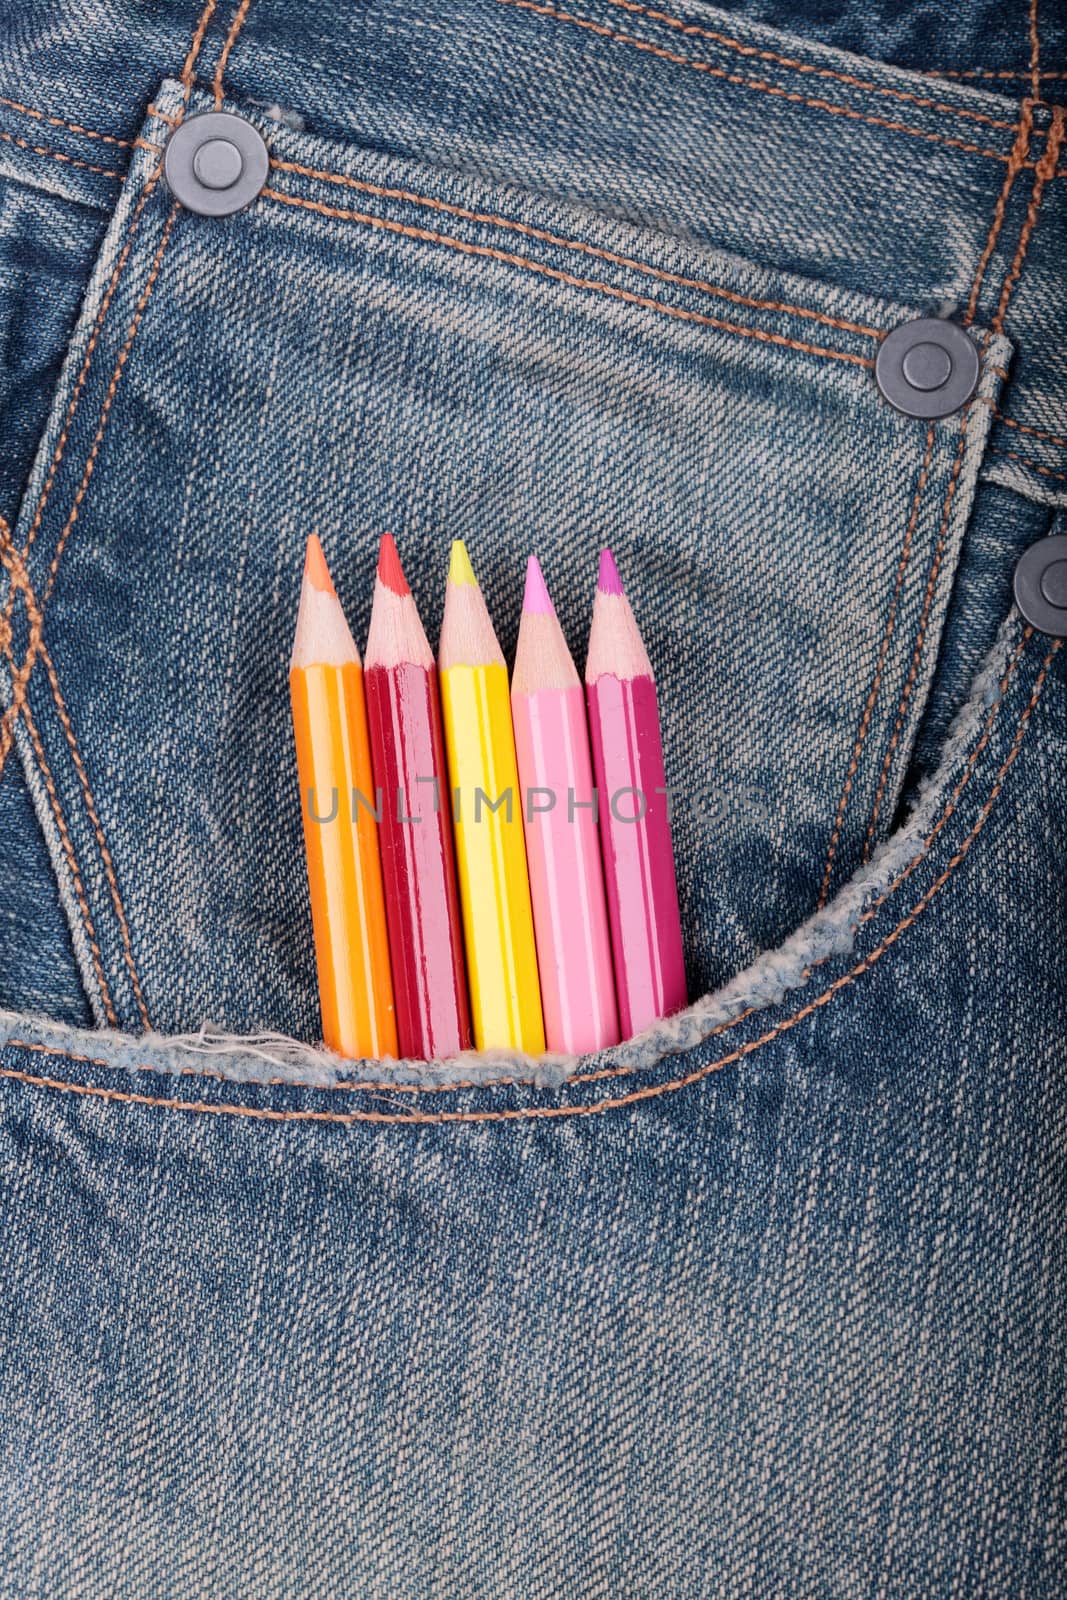 some pencil of different colors on a jeans pocket